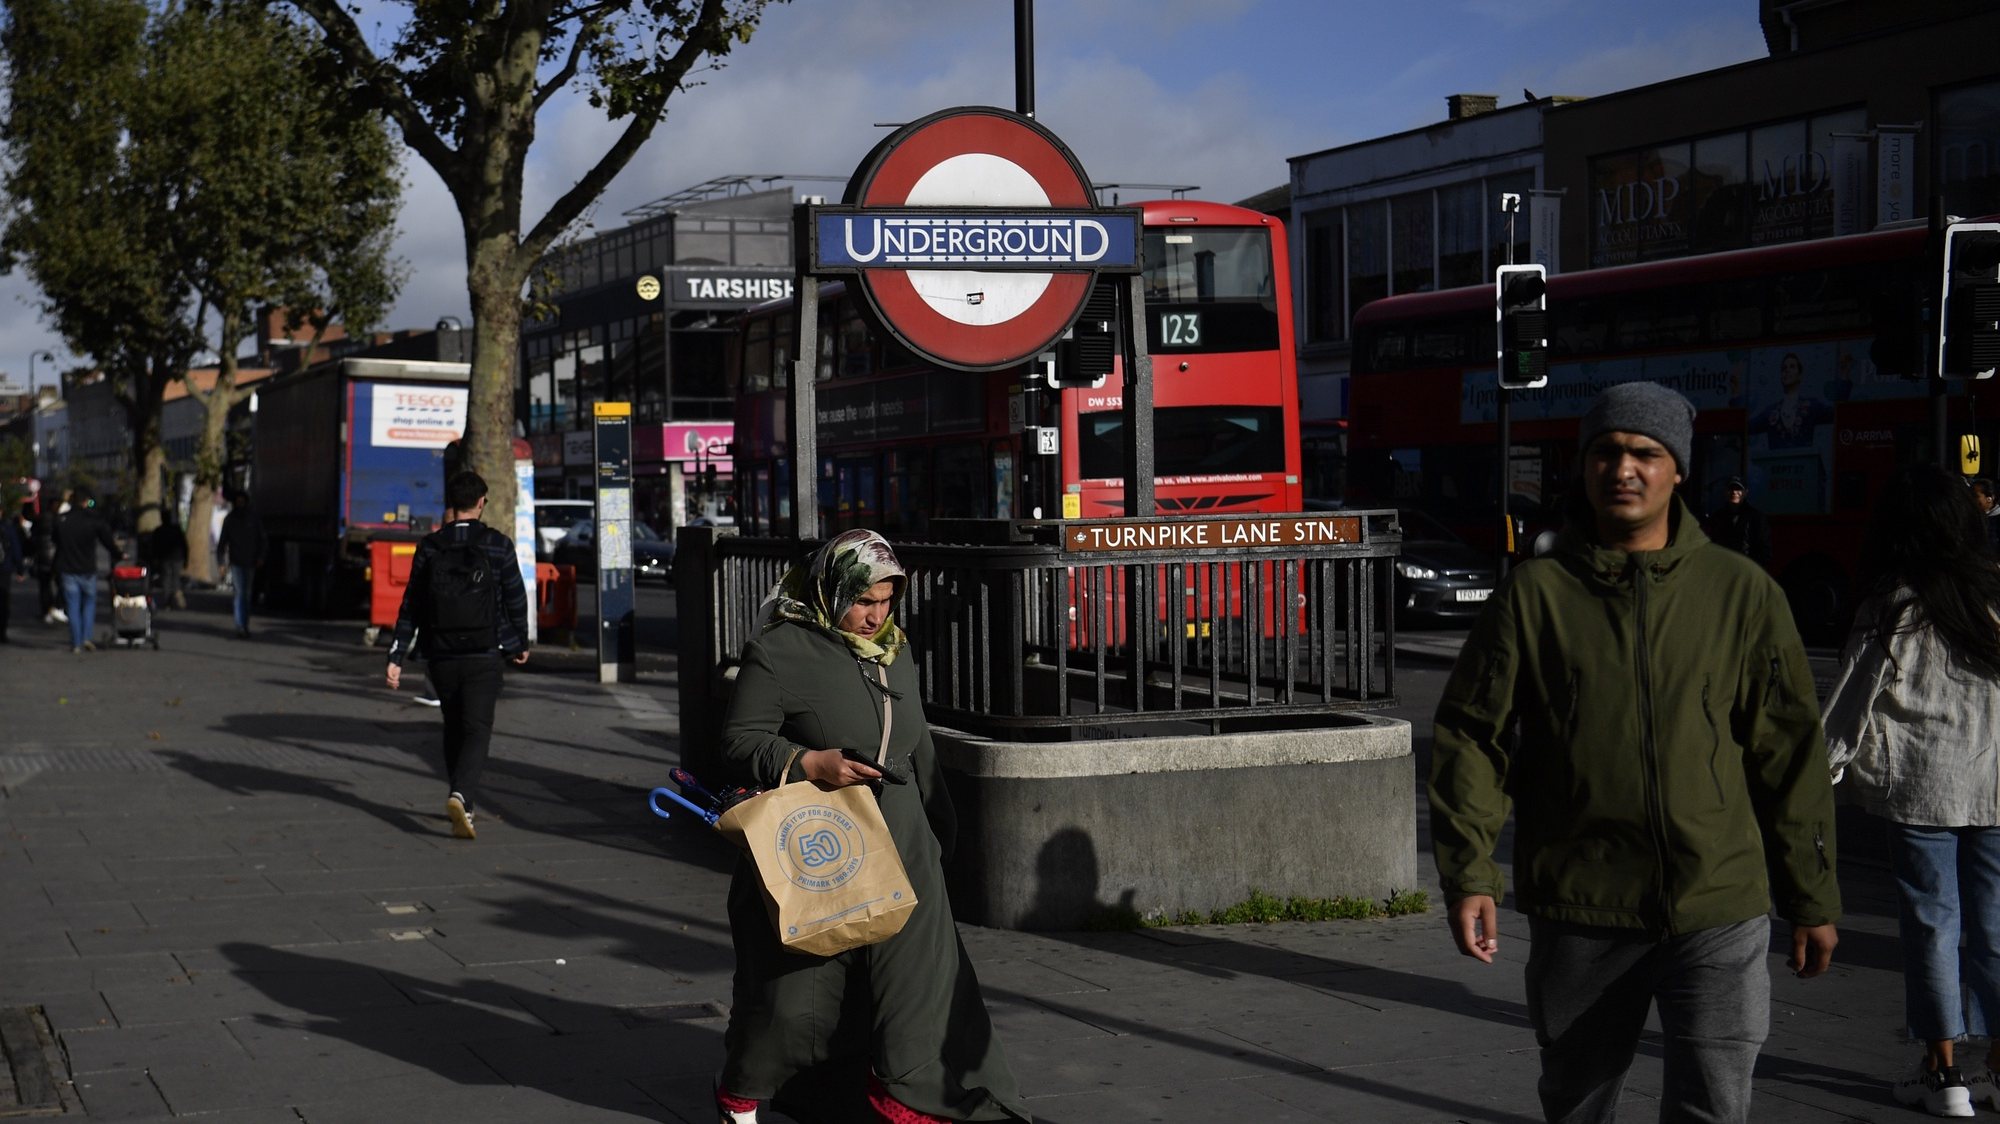 epa07957768 People pass an underground stop on Turnpike Lane in Haringey in London, Britain, 08 October 2019 (issued 29 October 2019). In the 2016 referendum, 75.6% of voters who turned out in the London Borough of Haringey chose to remain. Haringey is made up of some of the wealthiest and poorest areas in the UK. Less than 35% of Haringey is classed as White-British with the rest made up of European, Asian and Caribbean with large communities of Cypriot Greek and Turkish. After several days of discussions, the EU has named 31 January 2020 as the new date for the UK&#039;s withdrawal from the bloc, despite Prime Minister Boris Johnson insisting there would be no further delay beyond 31 October. With his options running out, Johnson has now pushed for a snap election to break the deadlock. Whatever happens, Johnson must achieve what his predecessor, Theresa May, found impossible: getting the deal through a bitterly divided House of Commons. The parliamentary rift, which has left the House at an impasse, illustrates the deep divide across much of the country since the UK chose to leave the EU. In the three years since the vote, British politicians have struggled to reach any sort of consensus on the most pressing issues surrounding Brexit. But political considerations aside, perhaps the biggest challenge facing the country is how to bridge the divide that has left the United Kingdom more disunited than ever.  EPA/NEIL HALL ATTENTION: This Image is part of a PHOTO SET